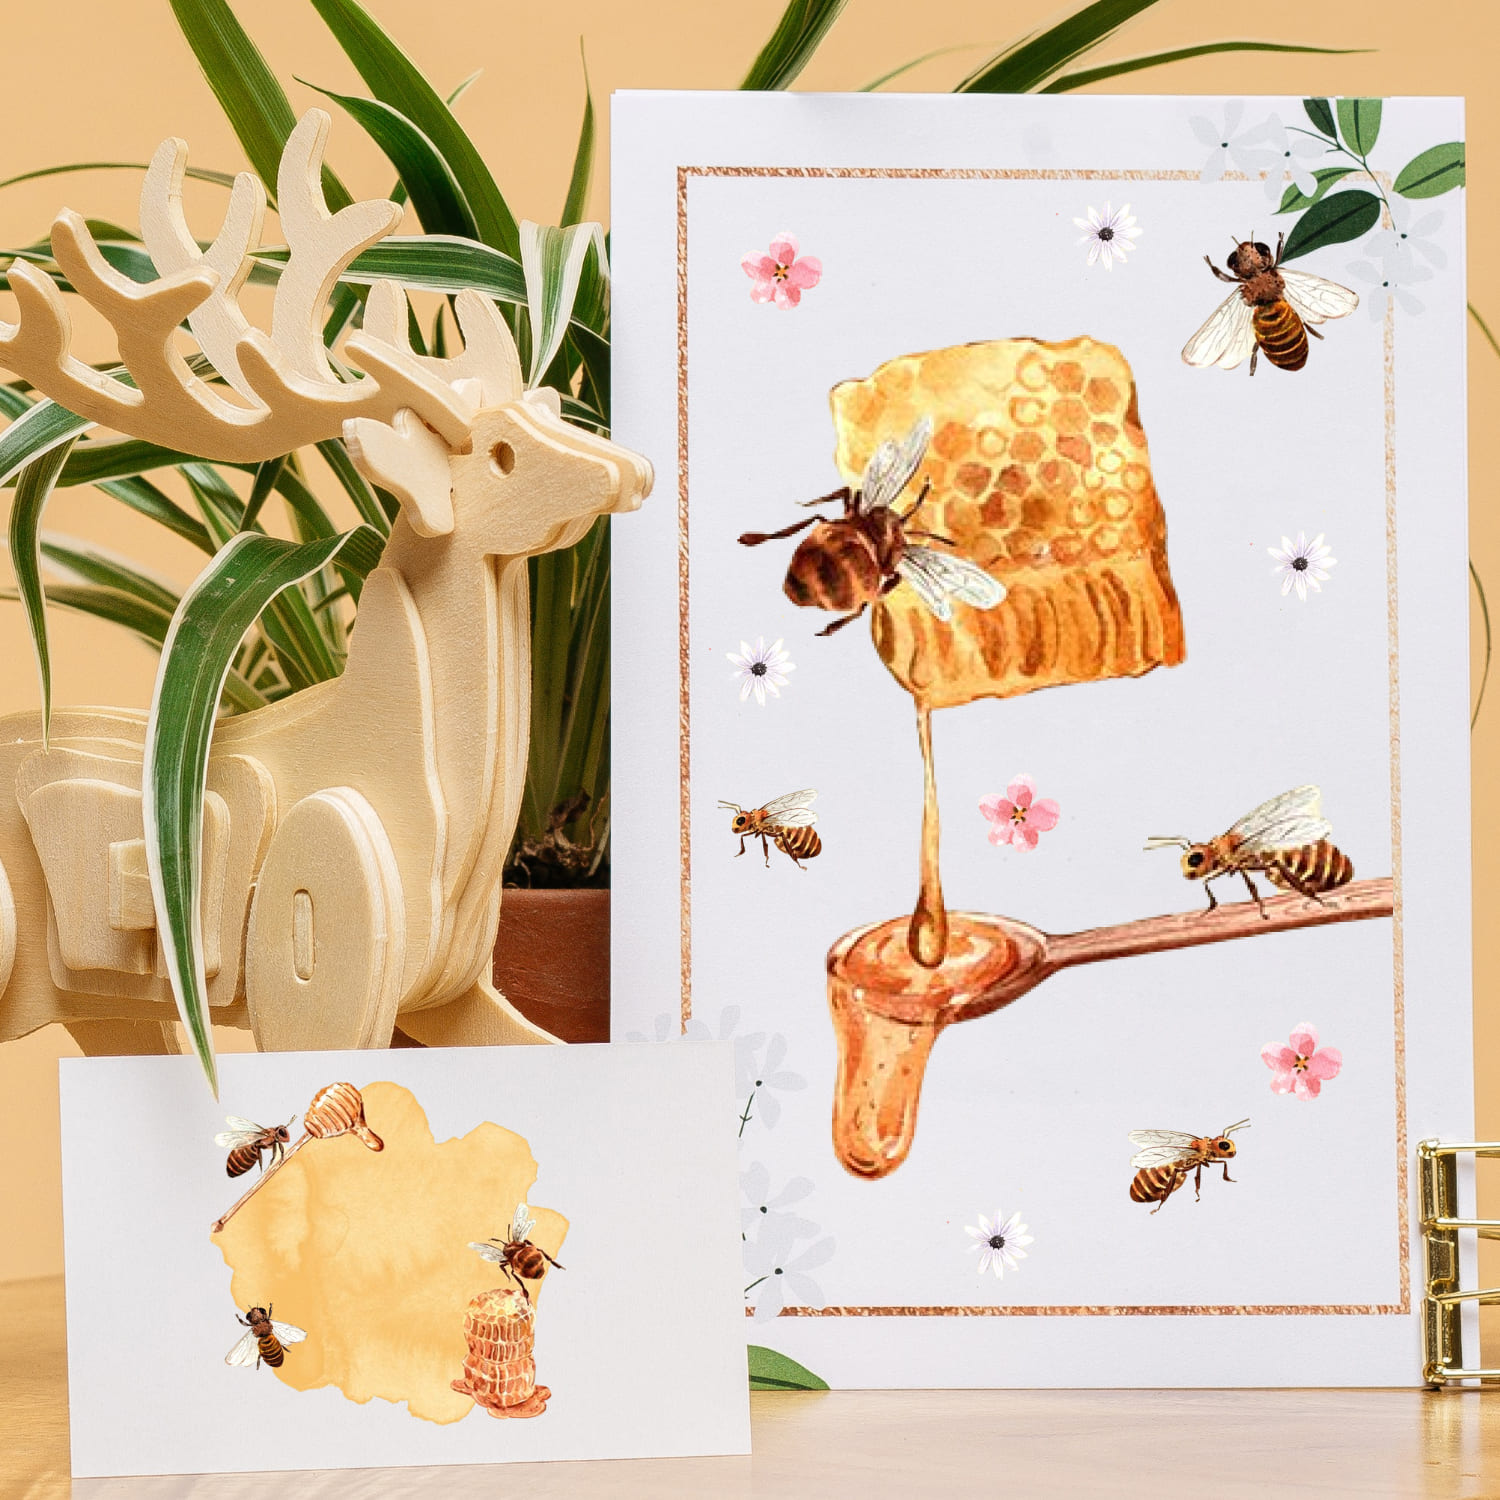 Honey Bees Watercolor - Bees With A Honey On The Postcard.